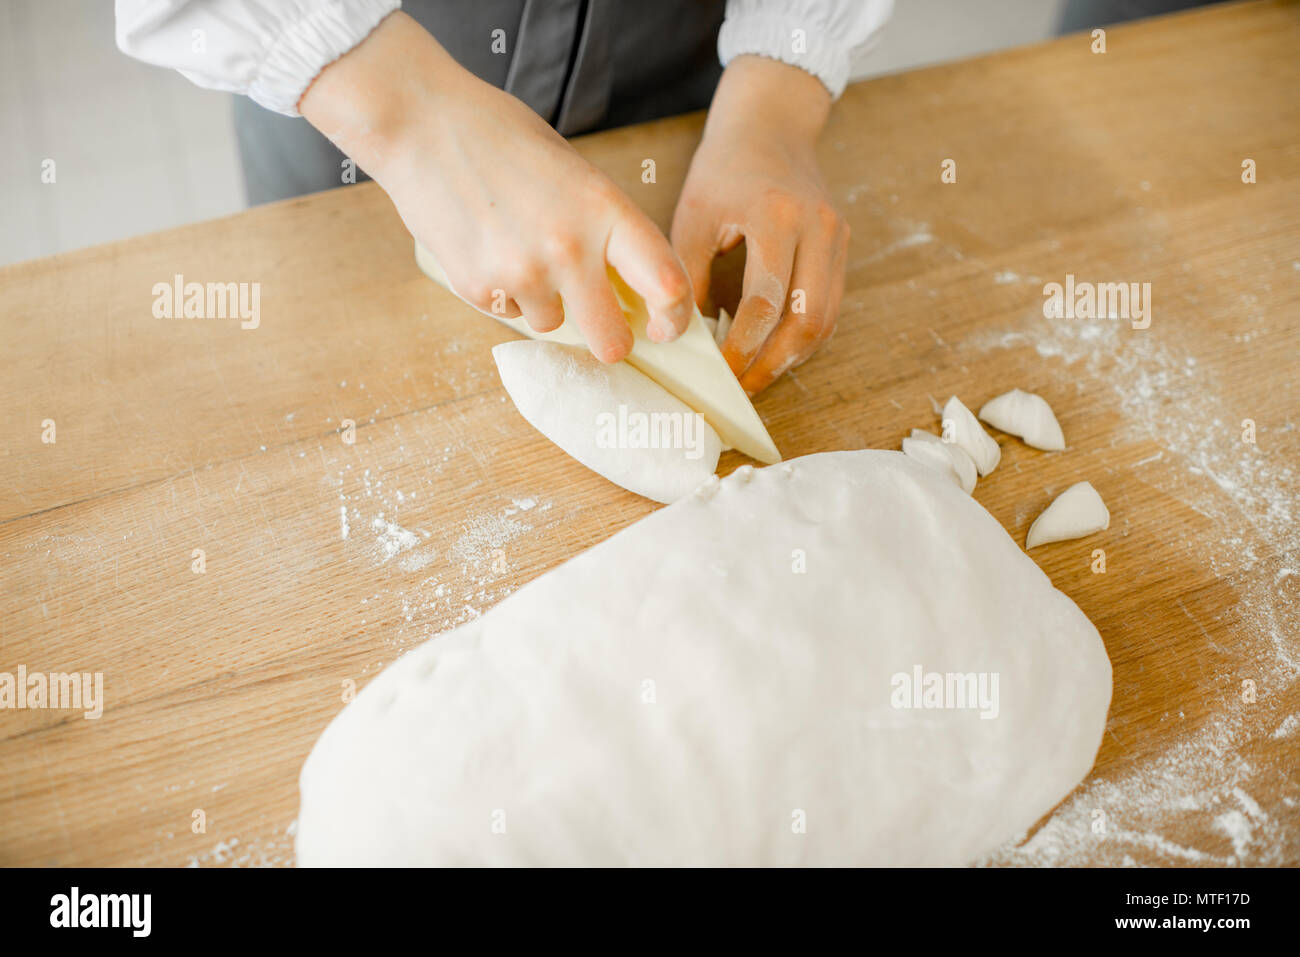 Baker forming daugh with hands for baking on the wooden table at the manufacturing Stock Photo